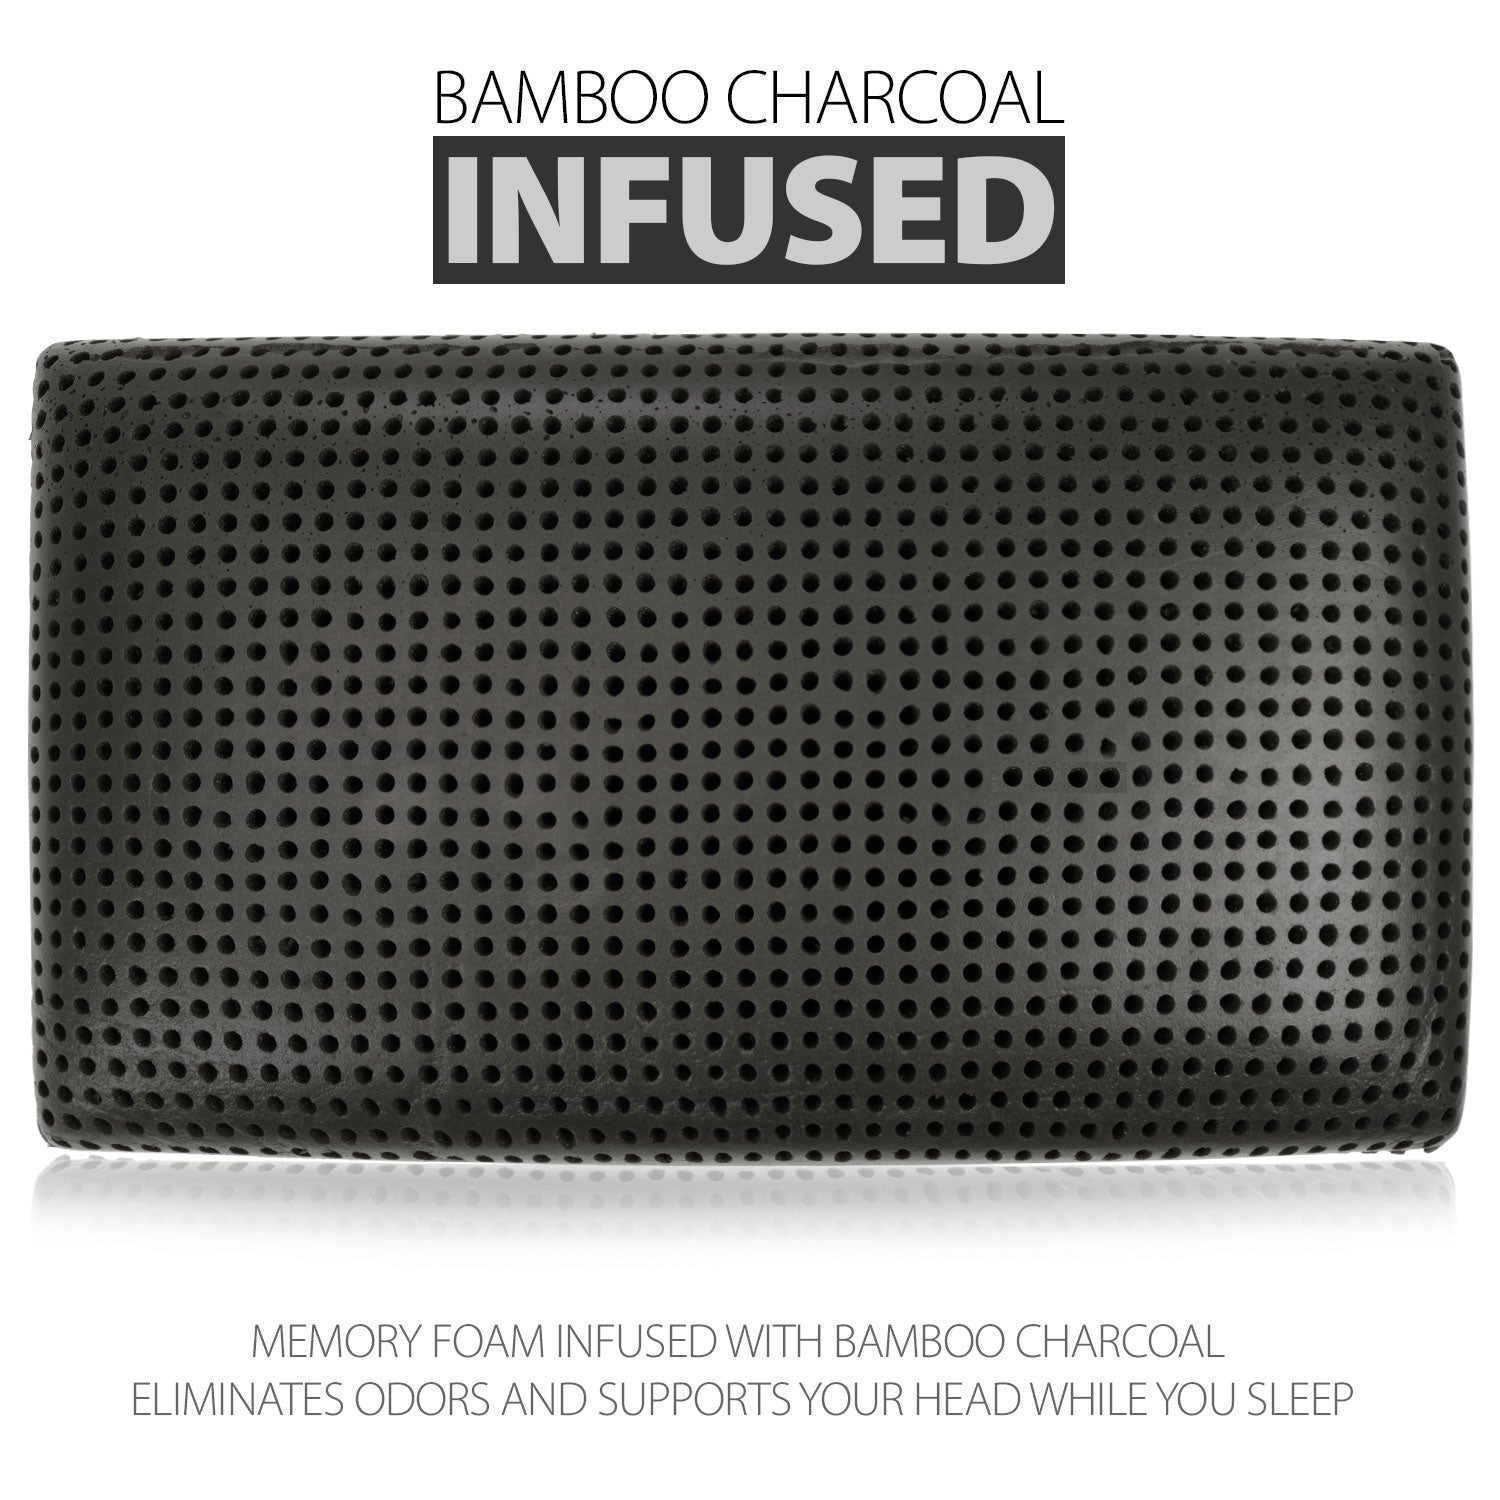  CYLEN Home-Memory Foam Rayon Made from Bamboo Charcoal